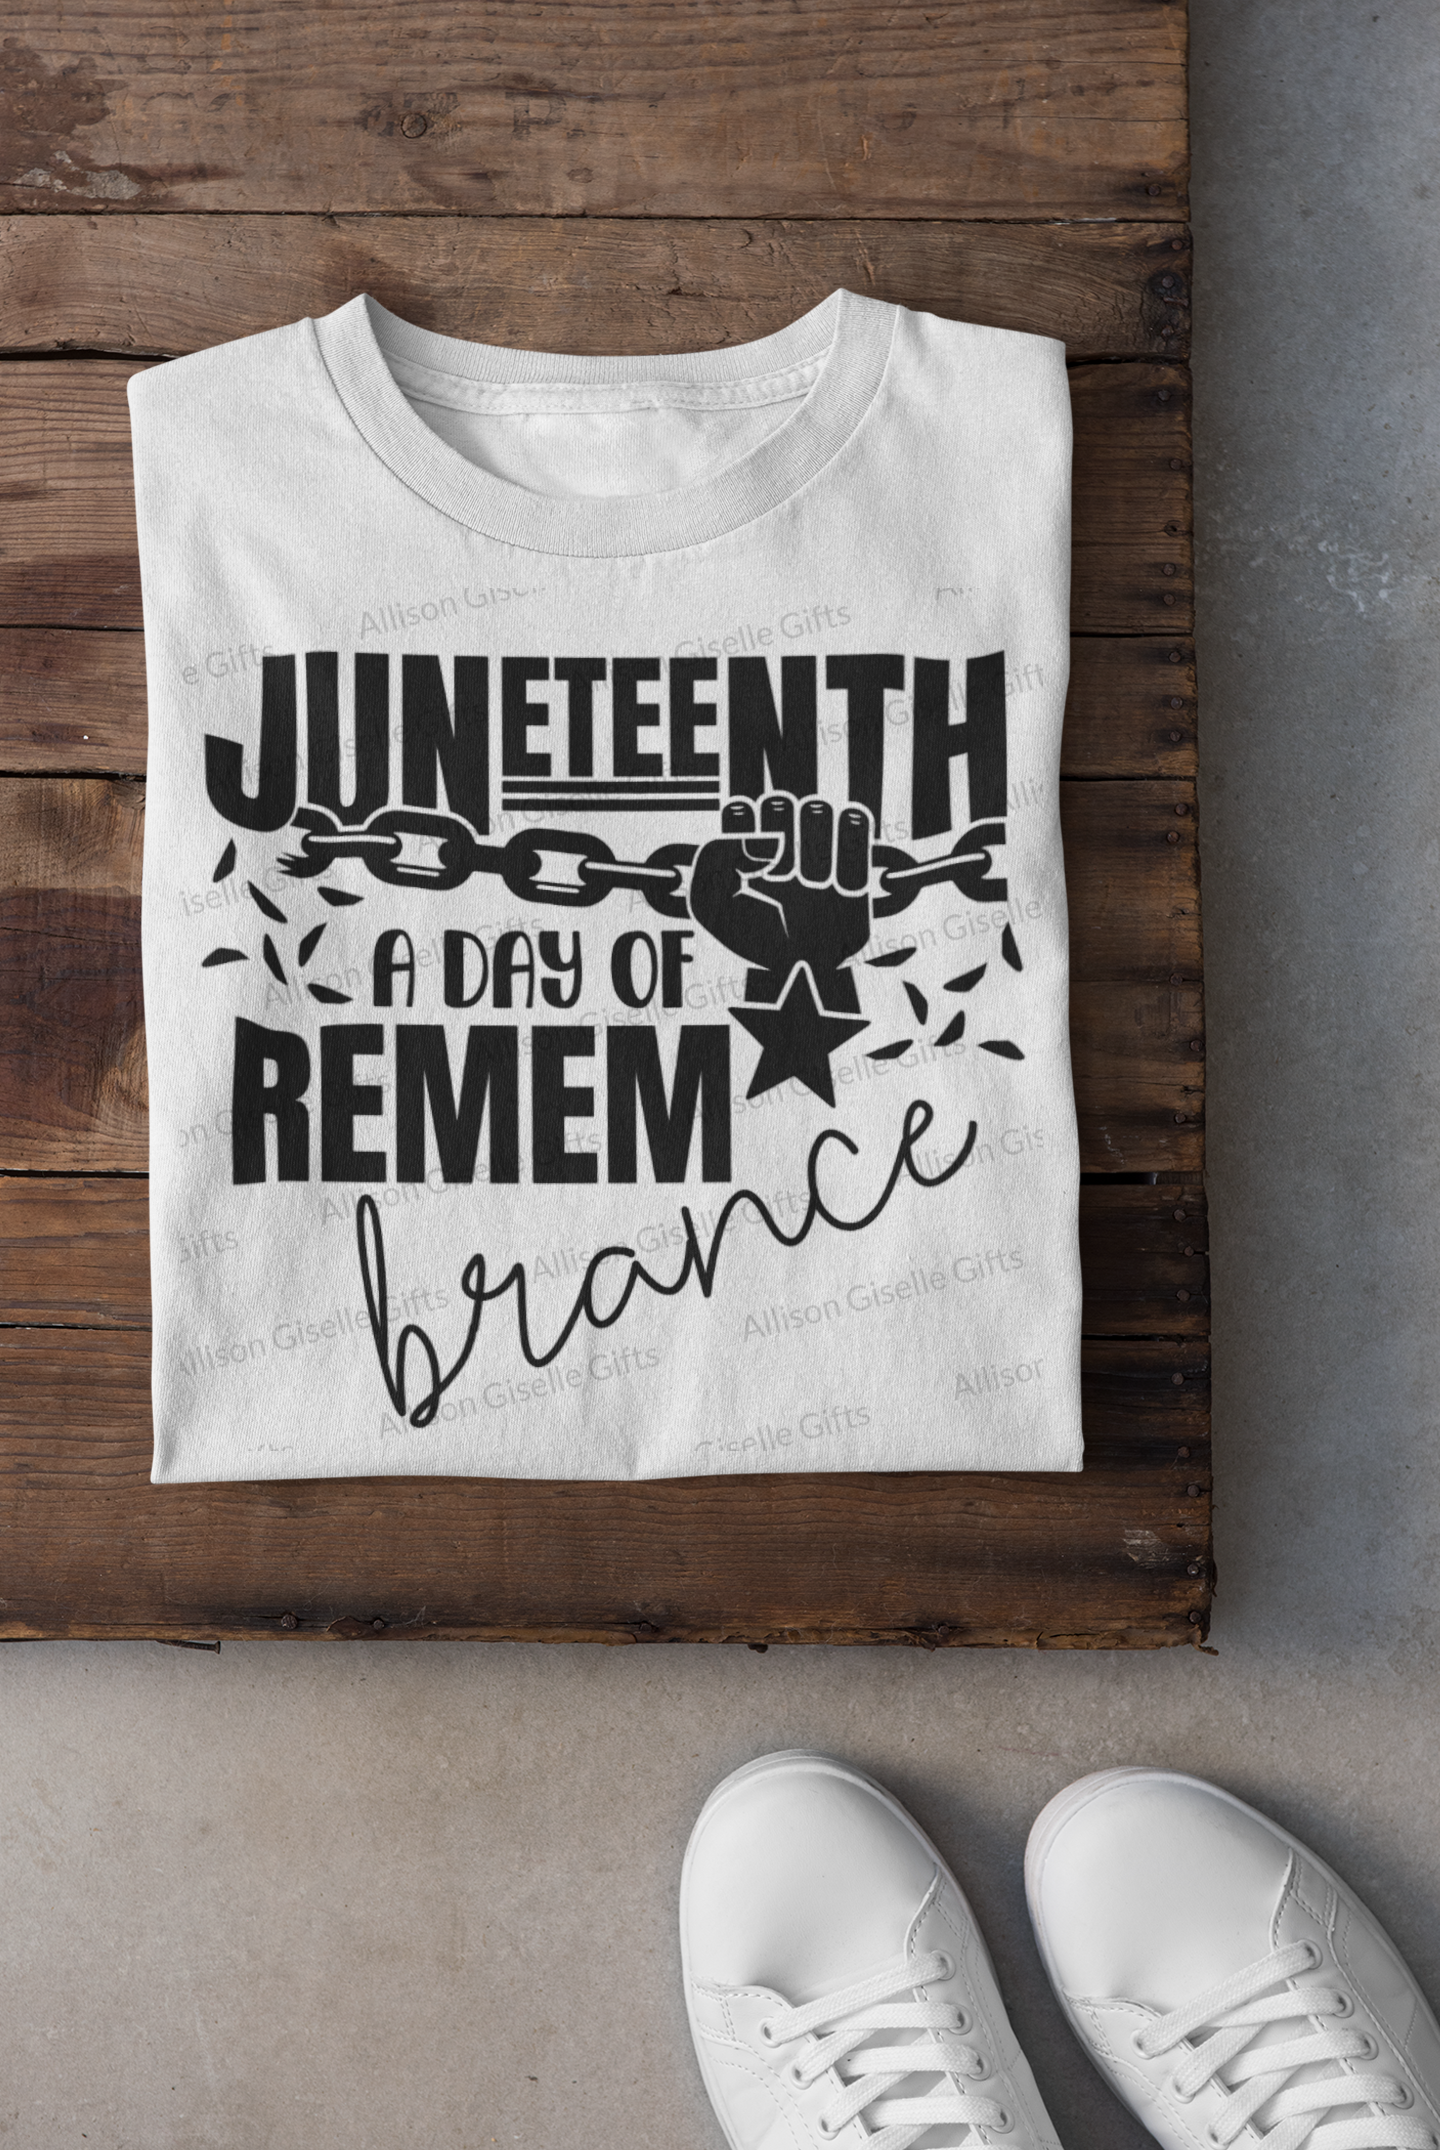 Juneteenth A Day of Remembrance T-Shirt, Celebration Shirt, Freedom Day Shirt, 1865 Shirt, Black Owned Shirt